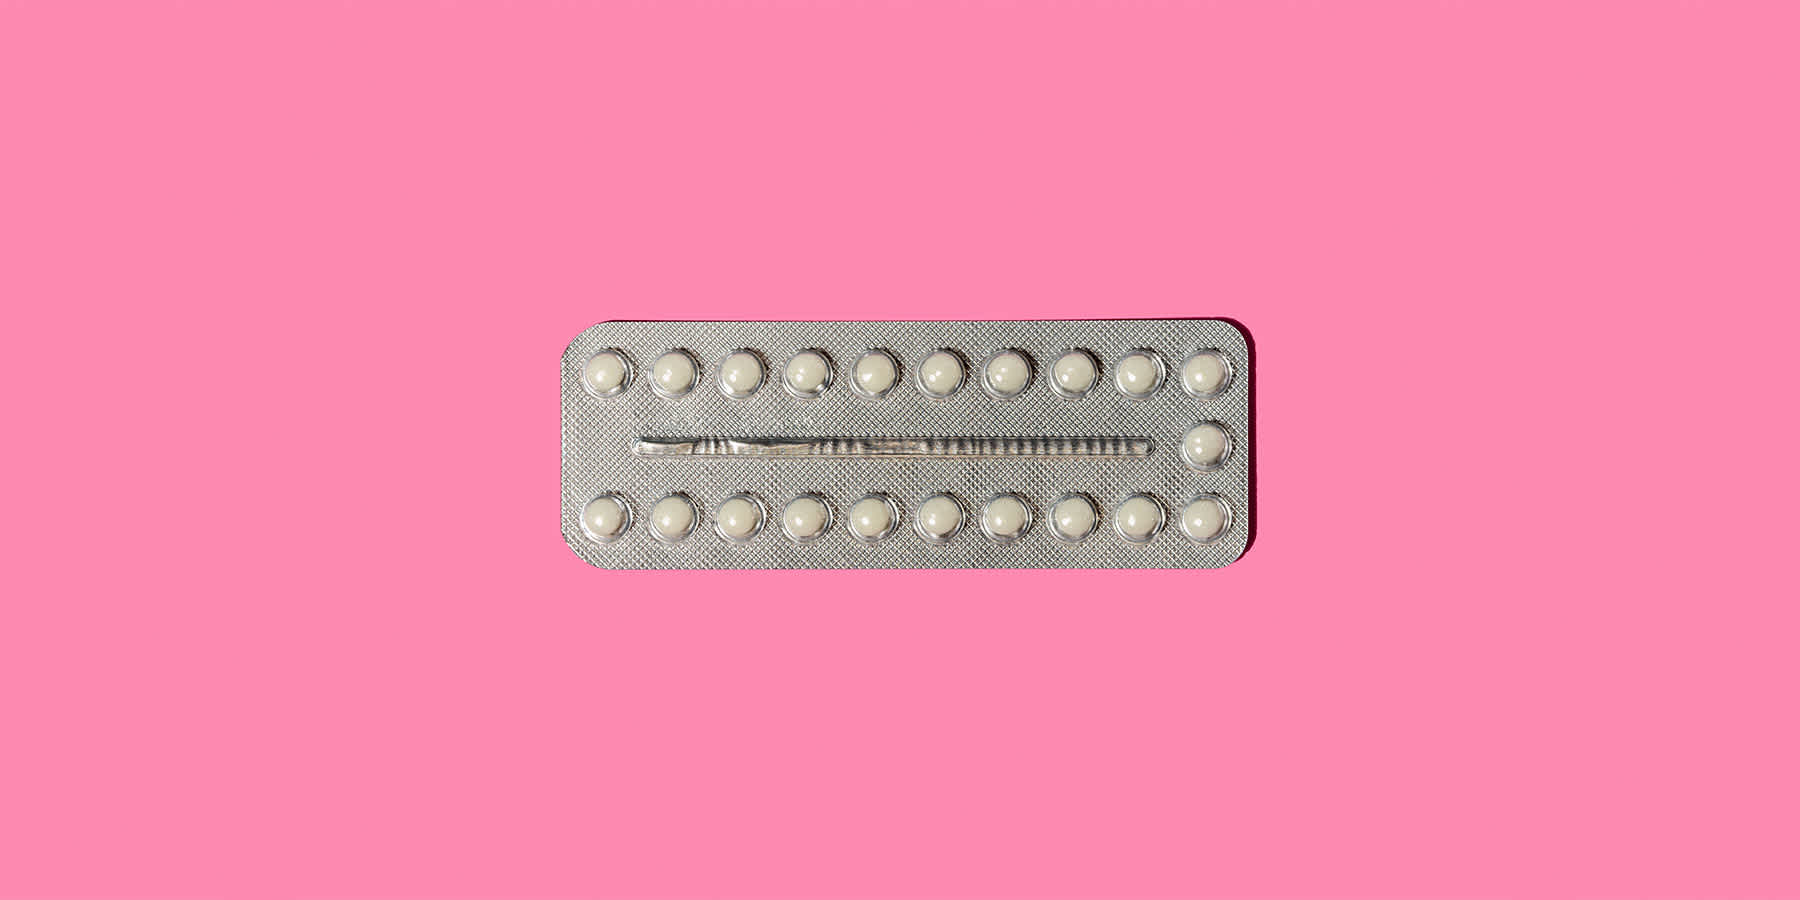 Birth control packet against a pink background